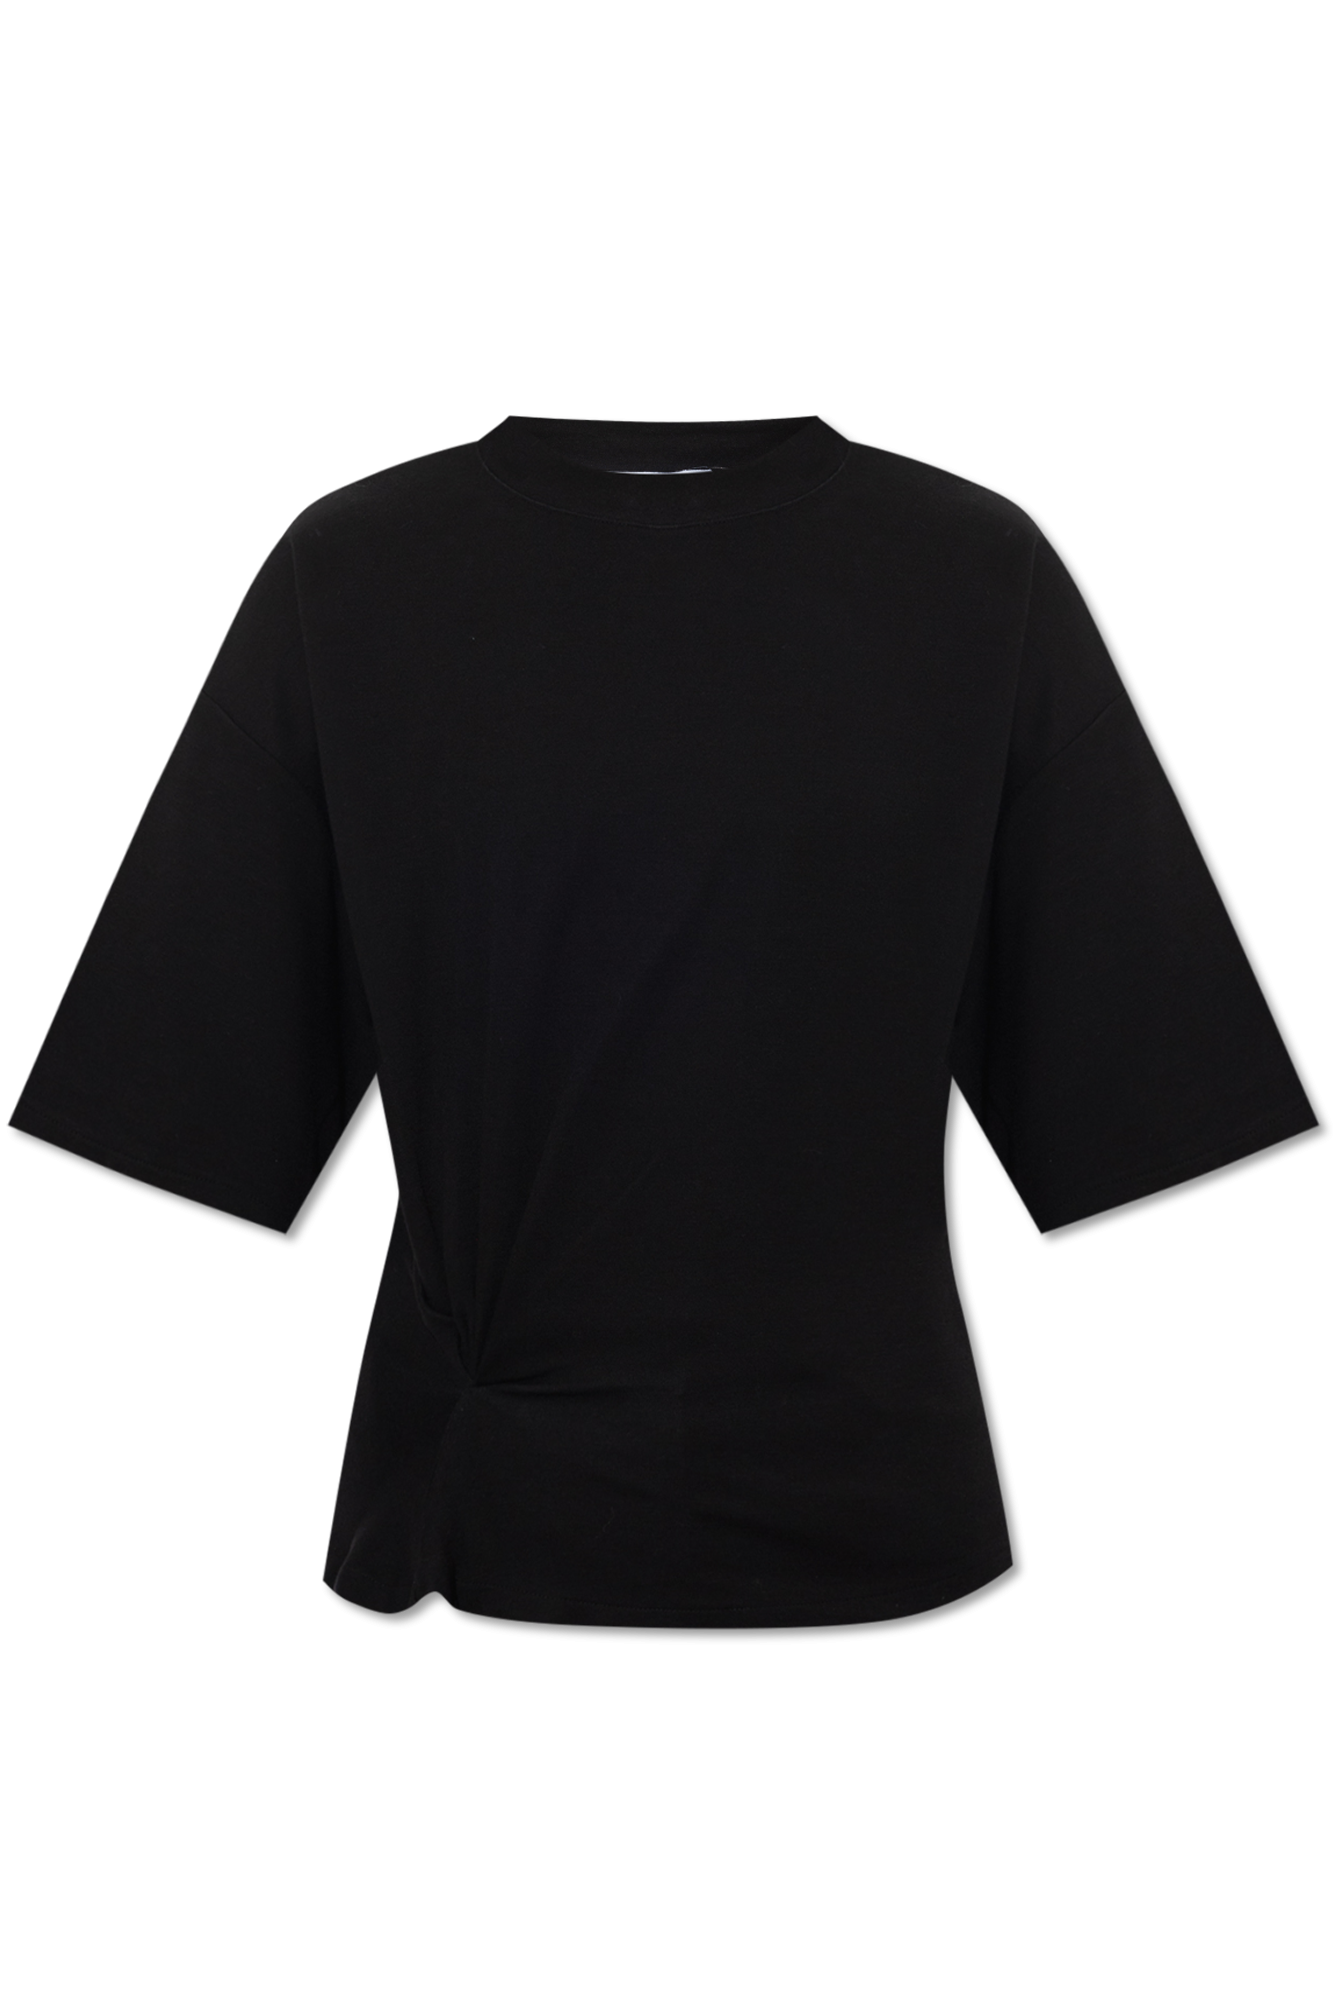 from with sweater - shirt things IetpShops Black \'Garcia\' Norway Iro refined - crew belts - white T this Keep